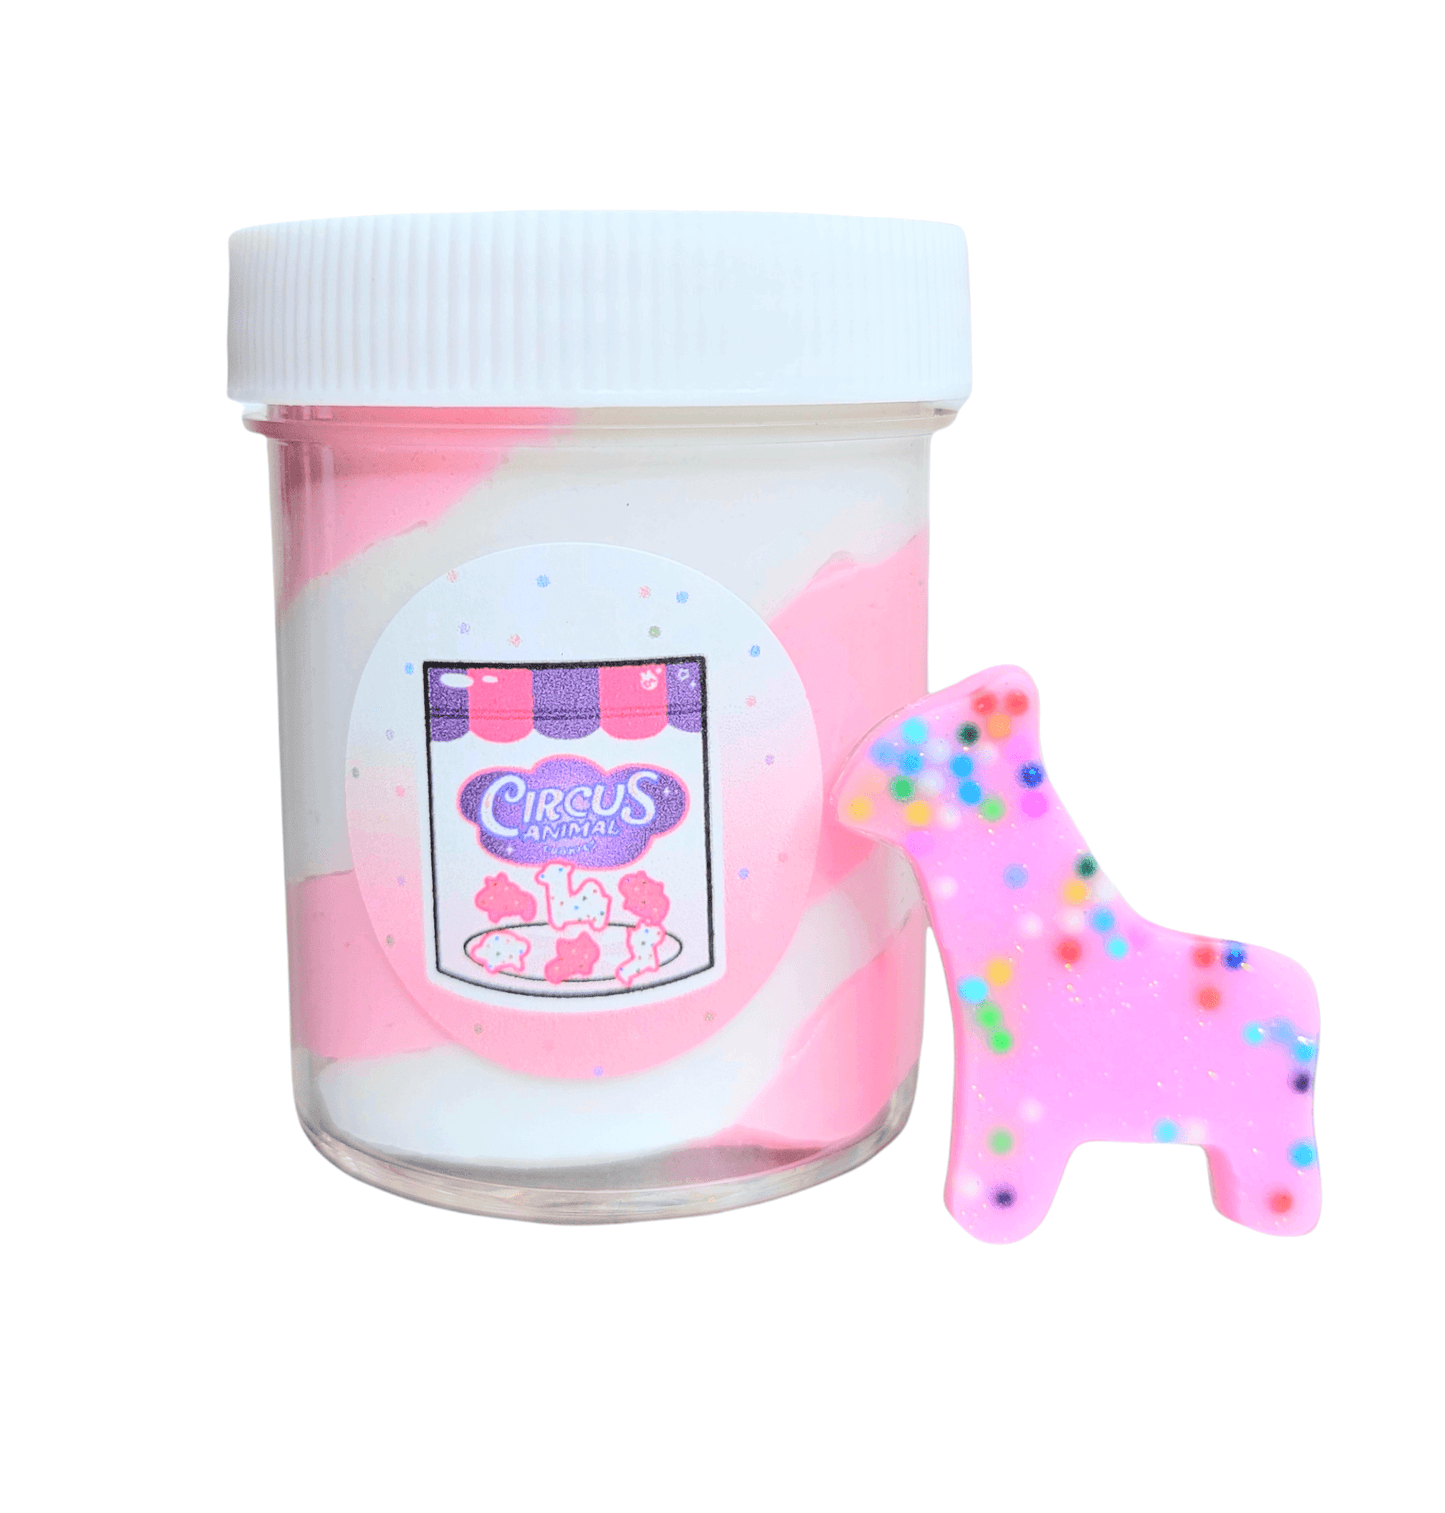 Animal Cookie Frosting Handmade Snow Butter Slime 4oz Slime by Hoshimi Slimes LLC | Hoshimi Slimes LLC